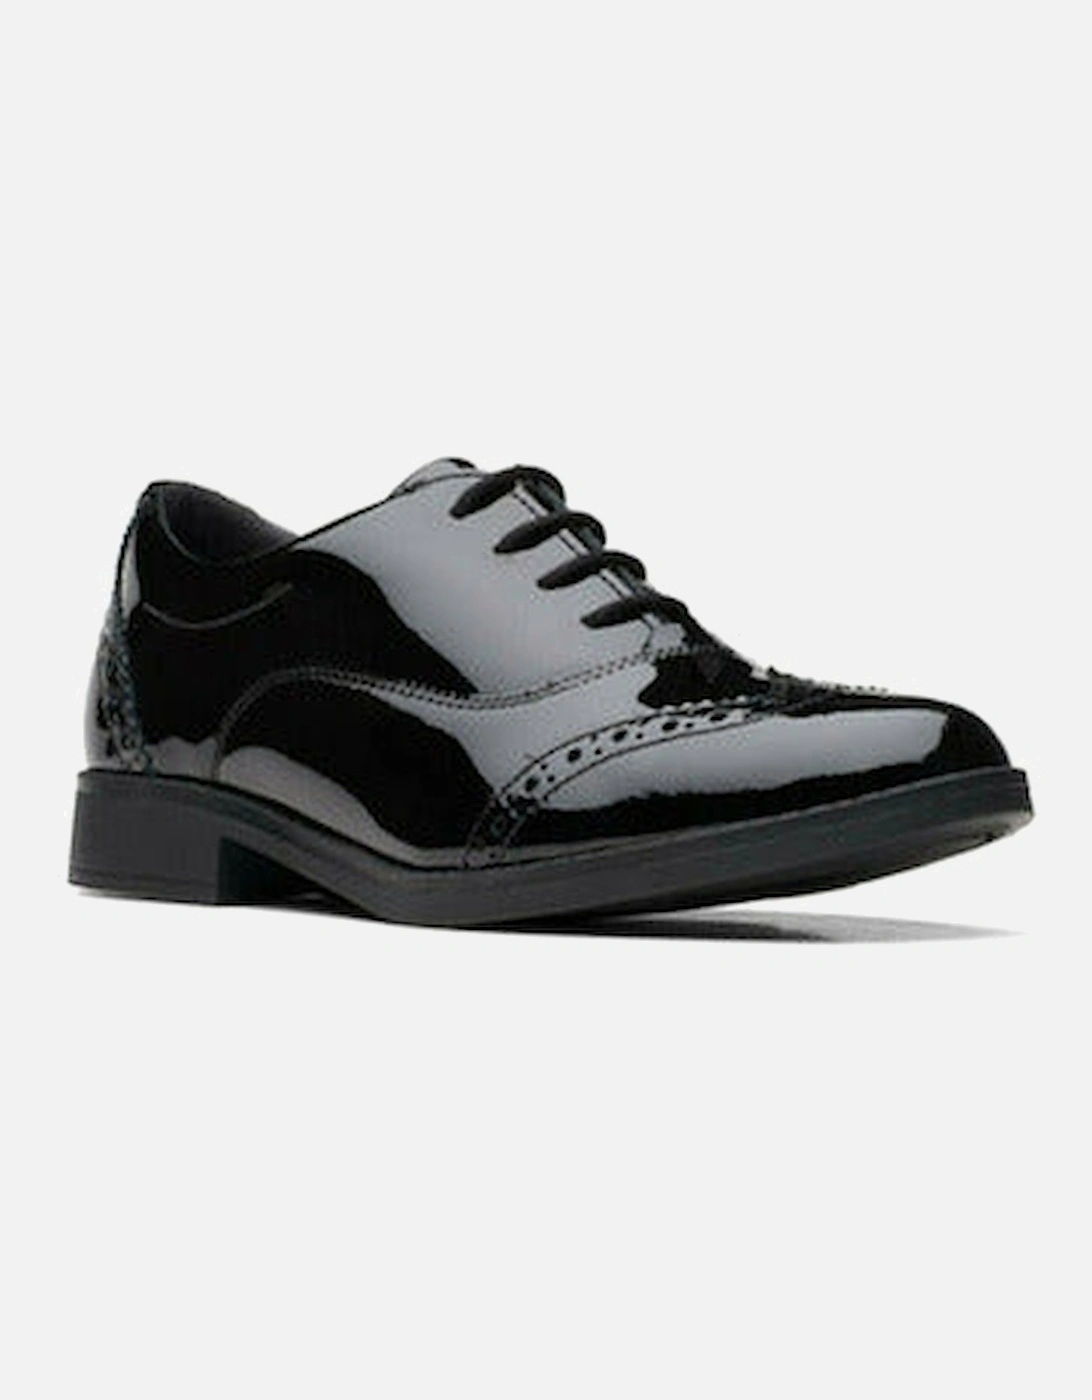 Aubrie Tap Youth black patent, 2 of 1